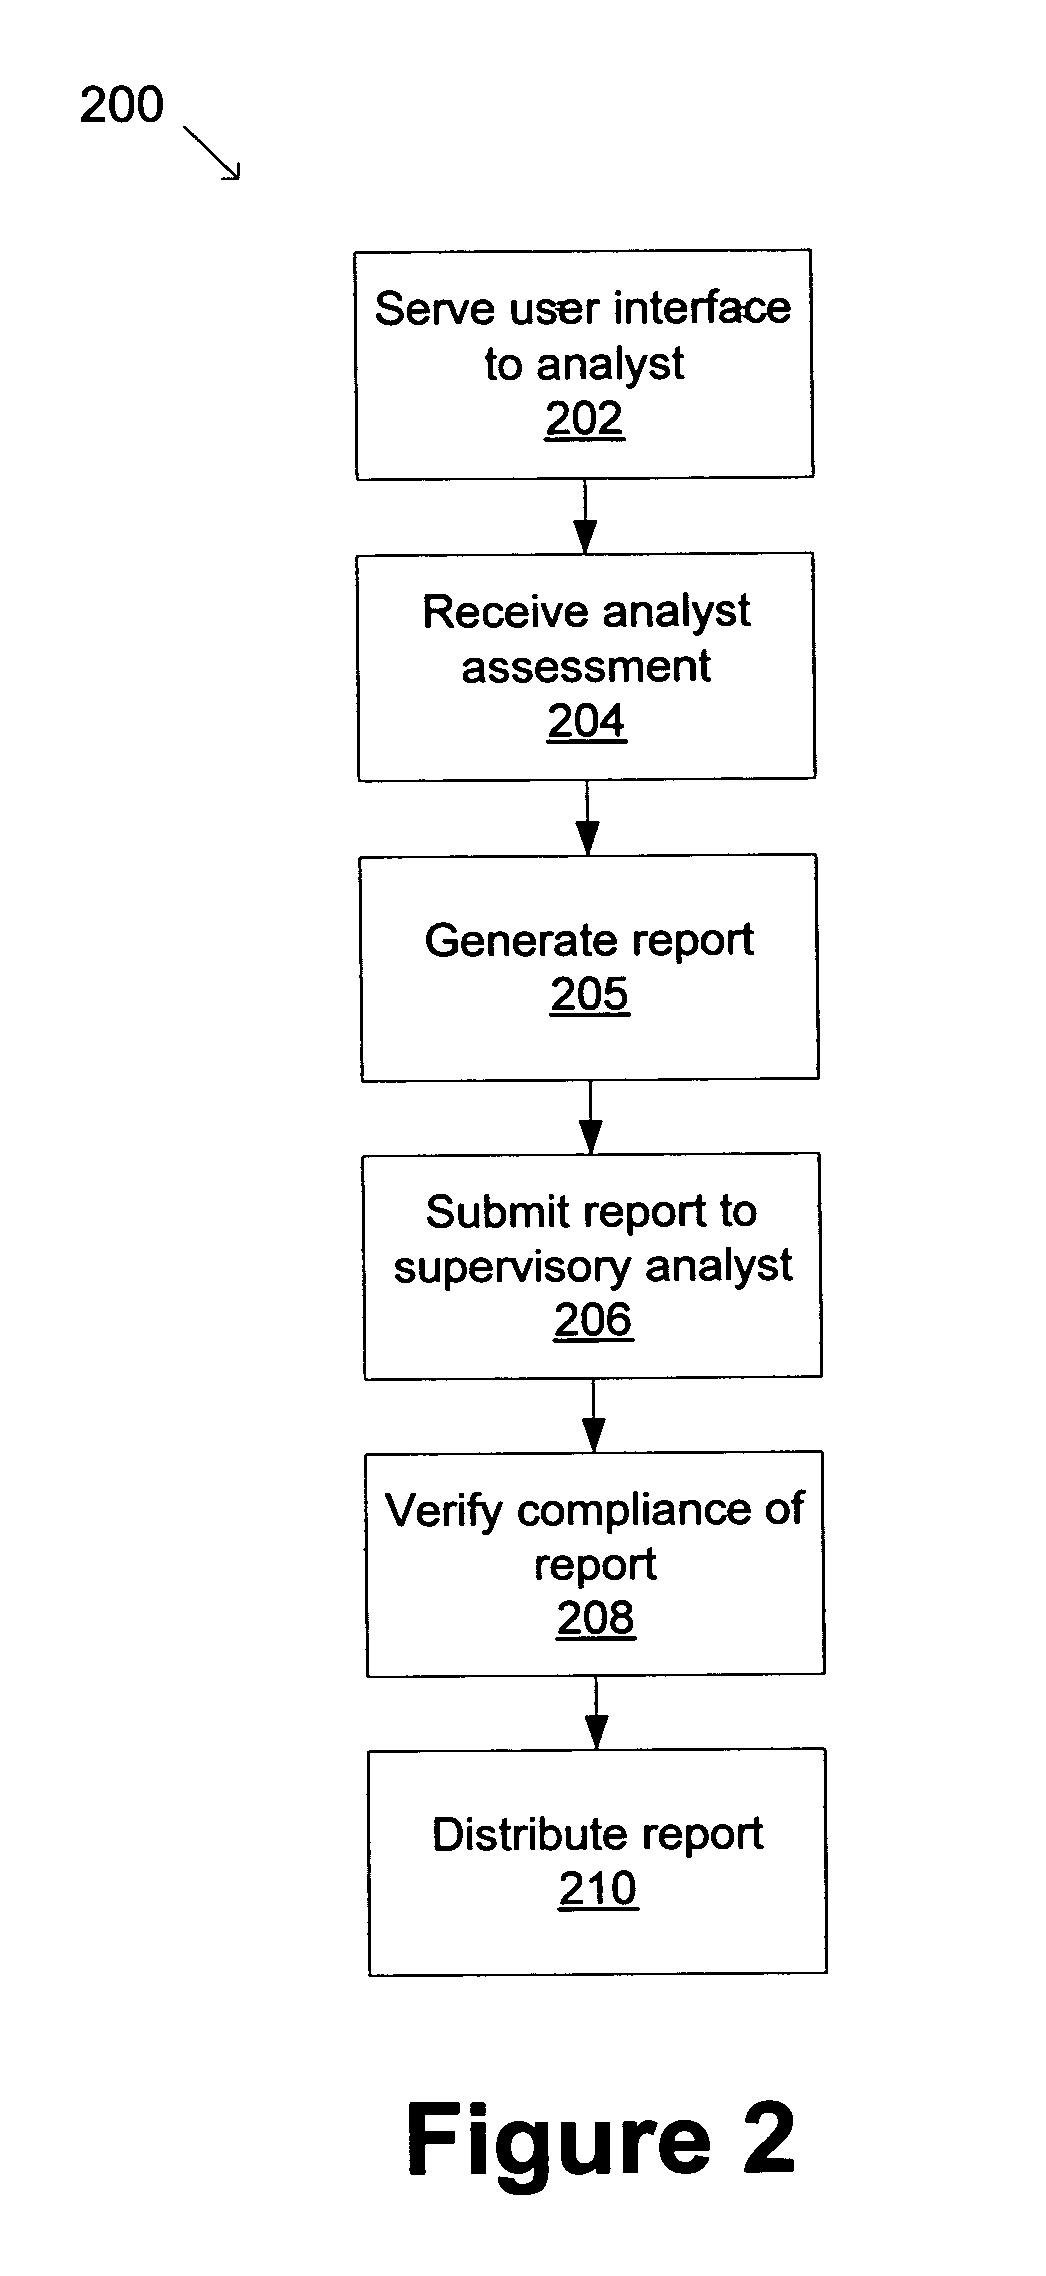 Authoring and distributing research analysts' initial reactions to breaking information